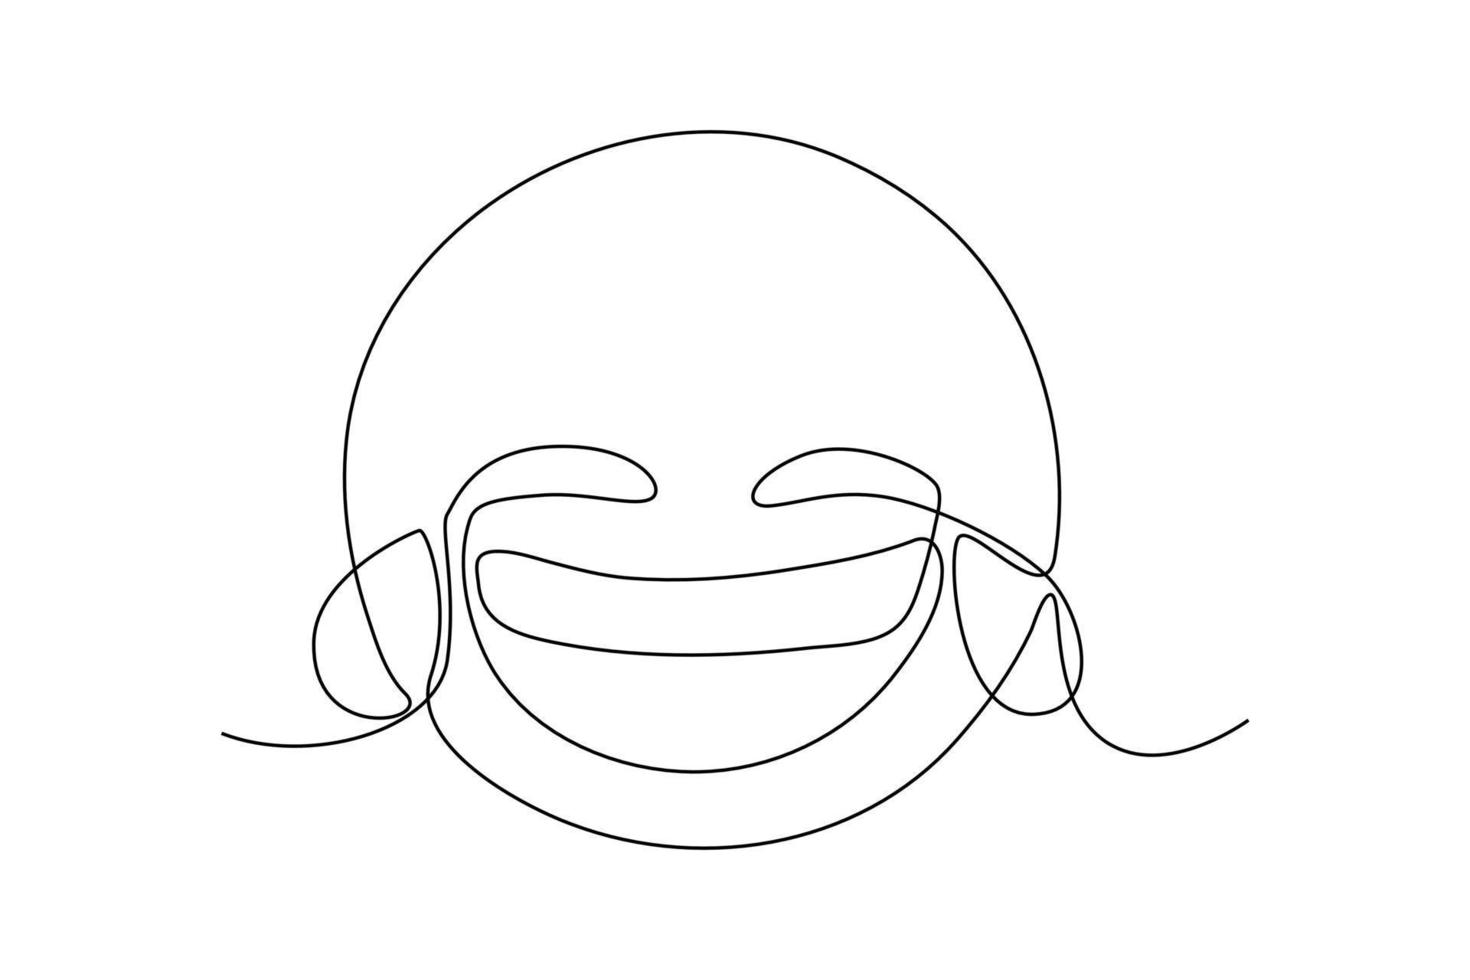 Continuous one line drawing laughing face. World laughter day concept. Single line draw design vector graphic illustration.